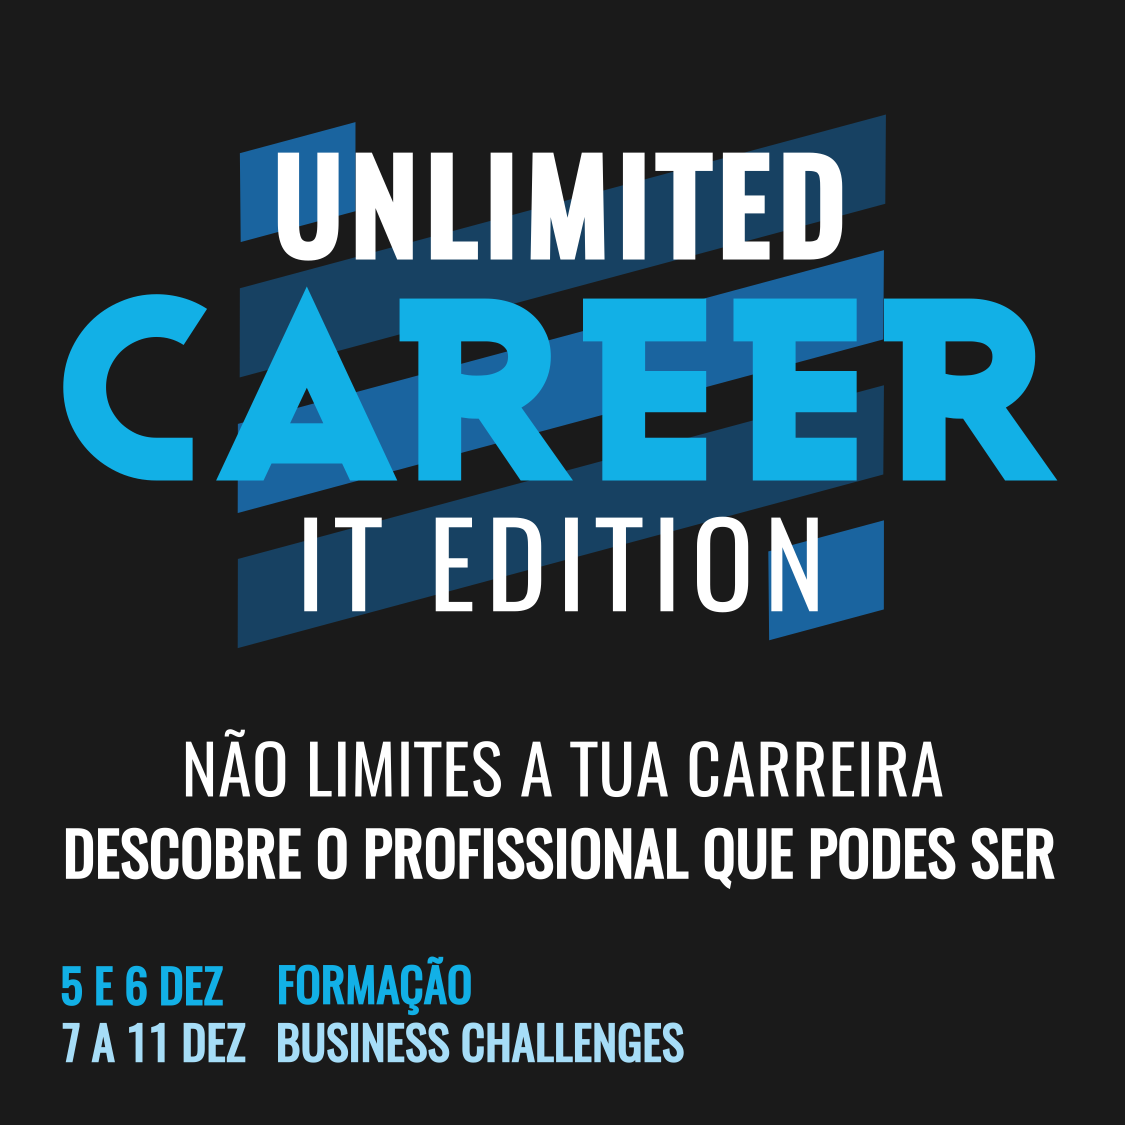 Unlimited Career - IT Edition